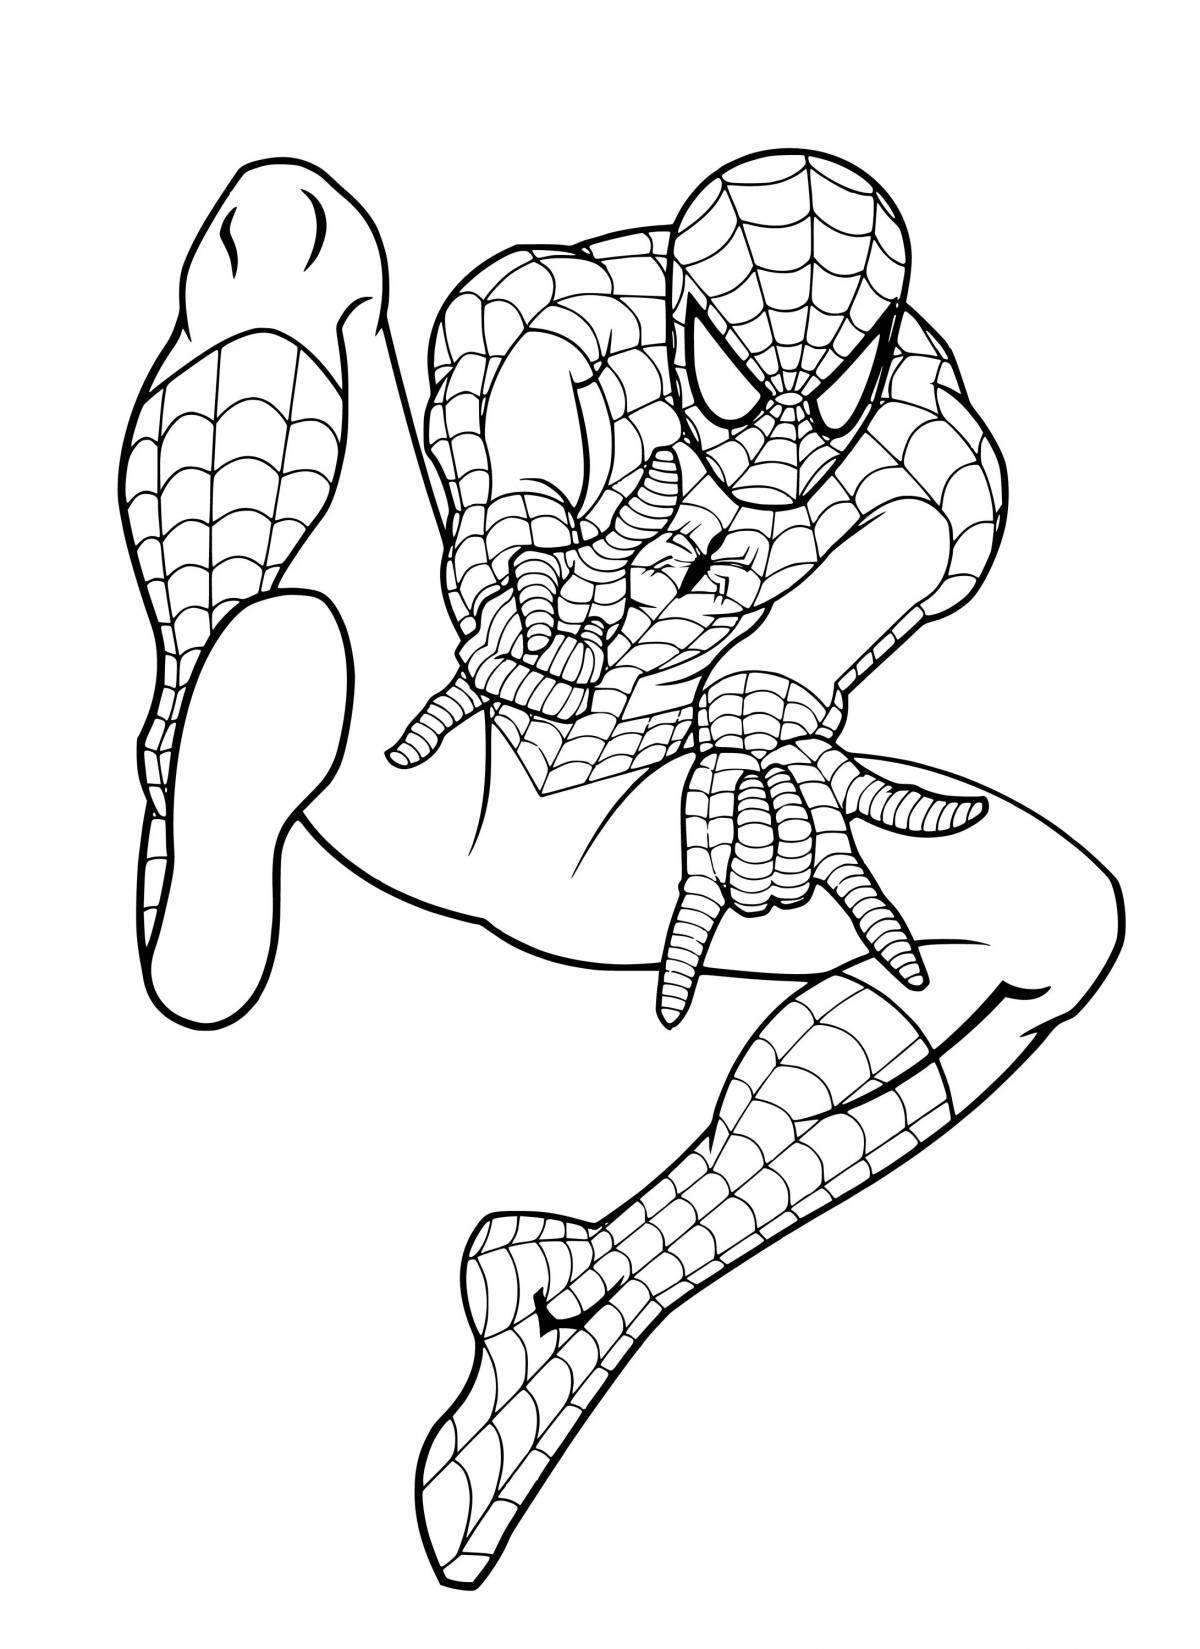 Adorable Spiderman coloring book for 5-6 year olds